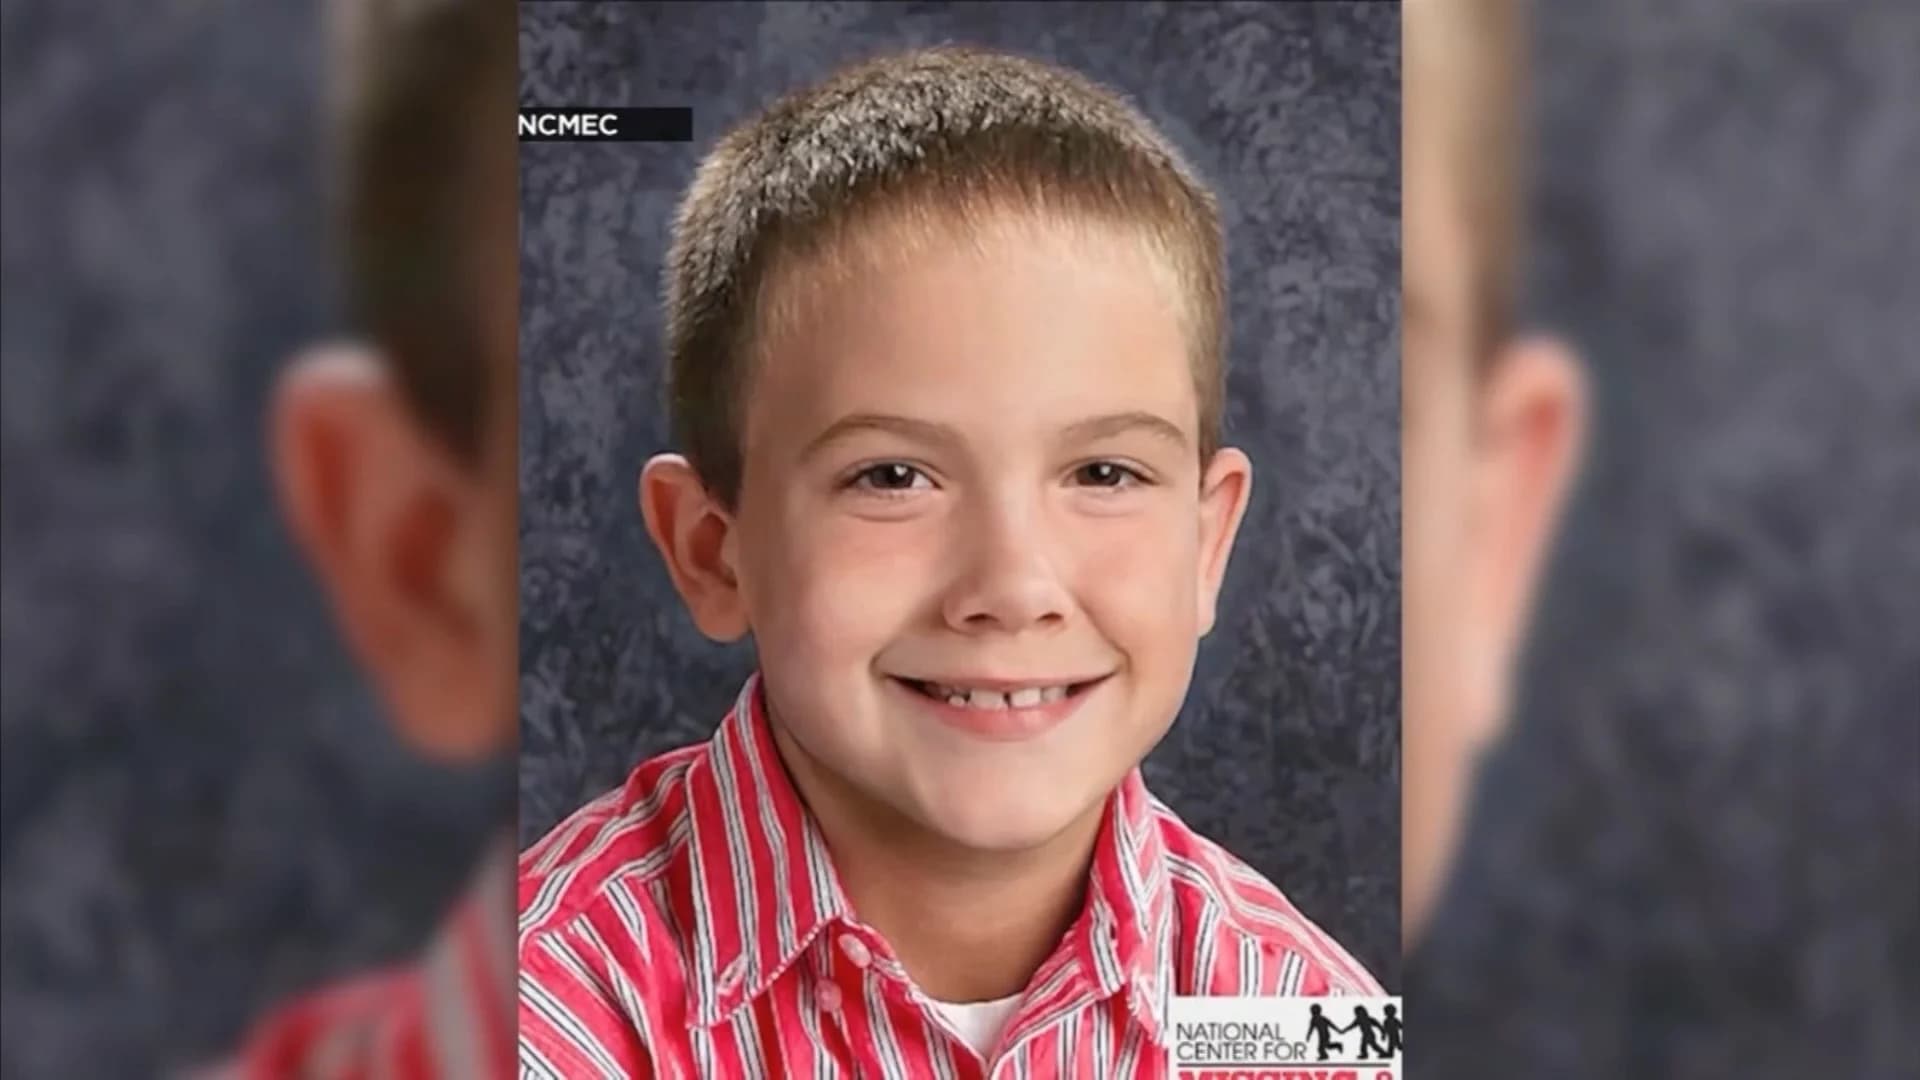 FBI rejects teen's claim to be long-missing boy Timmothy Pitzen